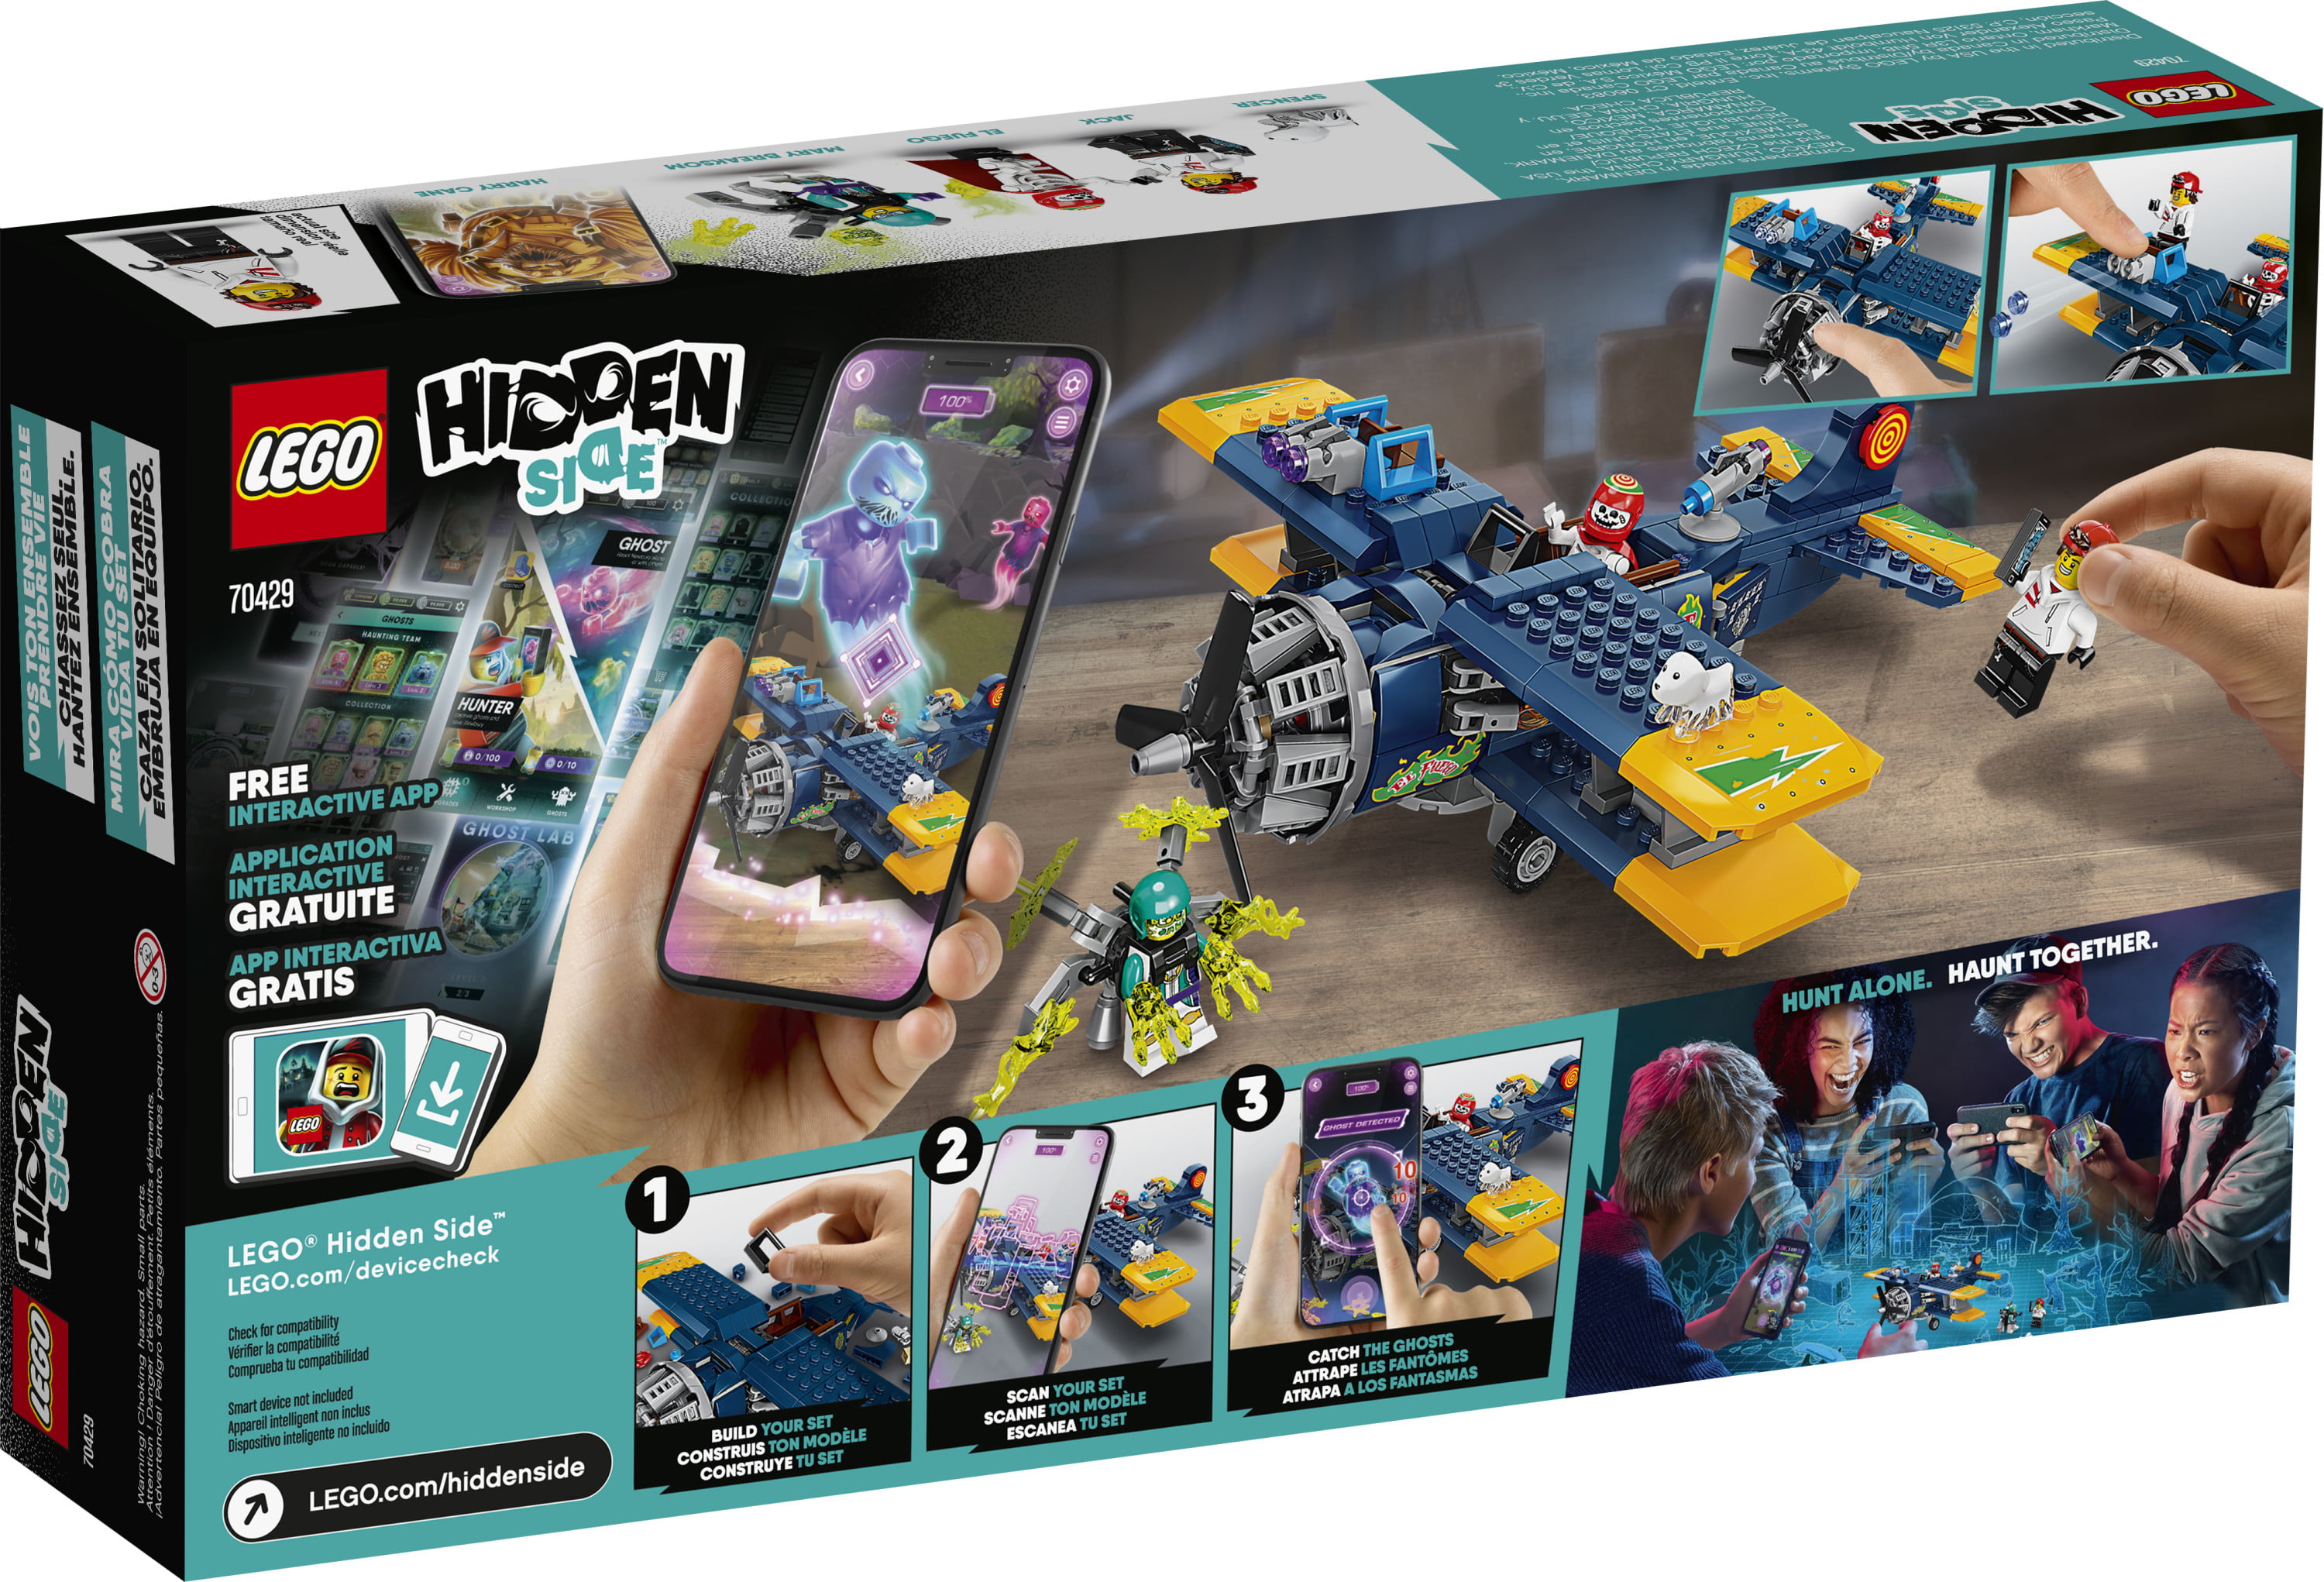 LEGO Hidden Side El Fuego's Stunt 70429 Augmented Reality (AR) Play Experience for Kids (295 Pieces) -